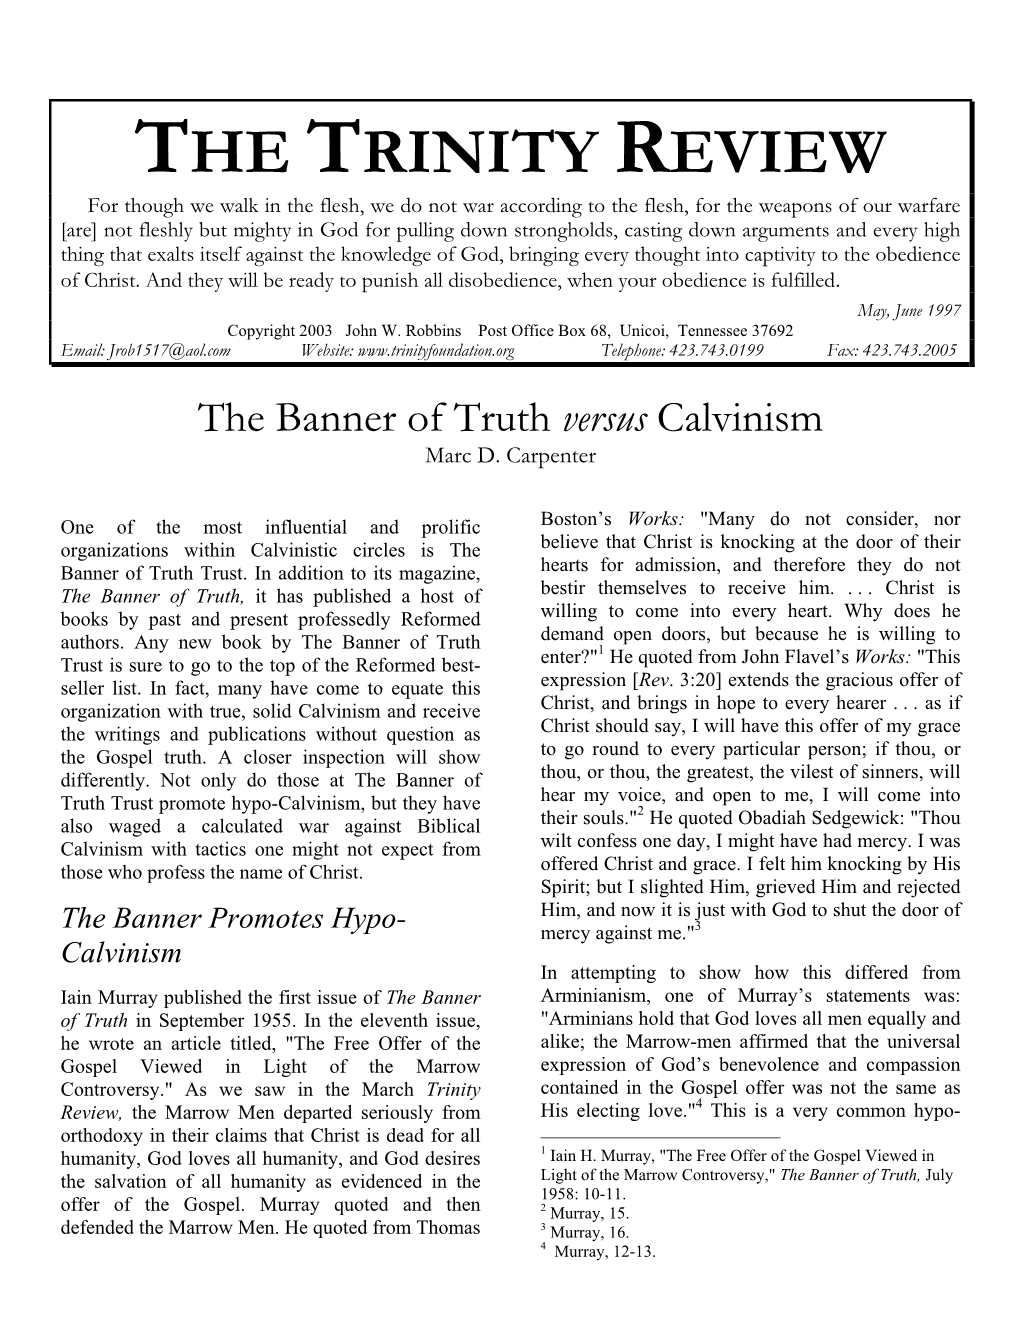 The Trinity Review